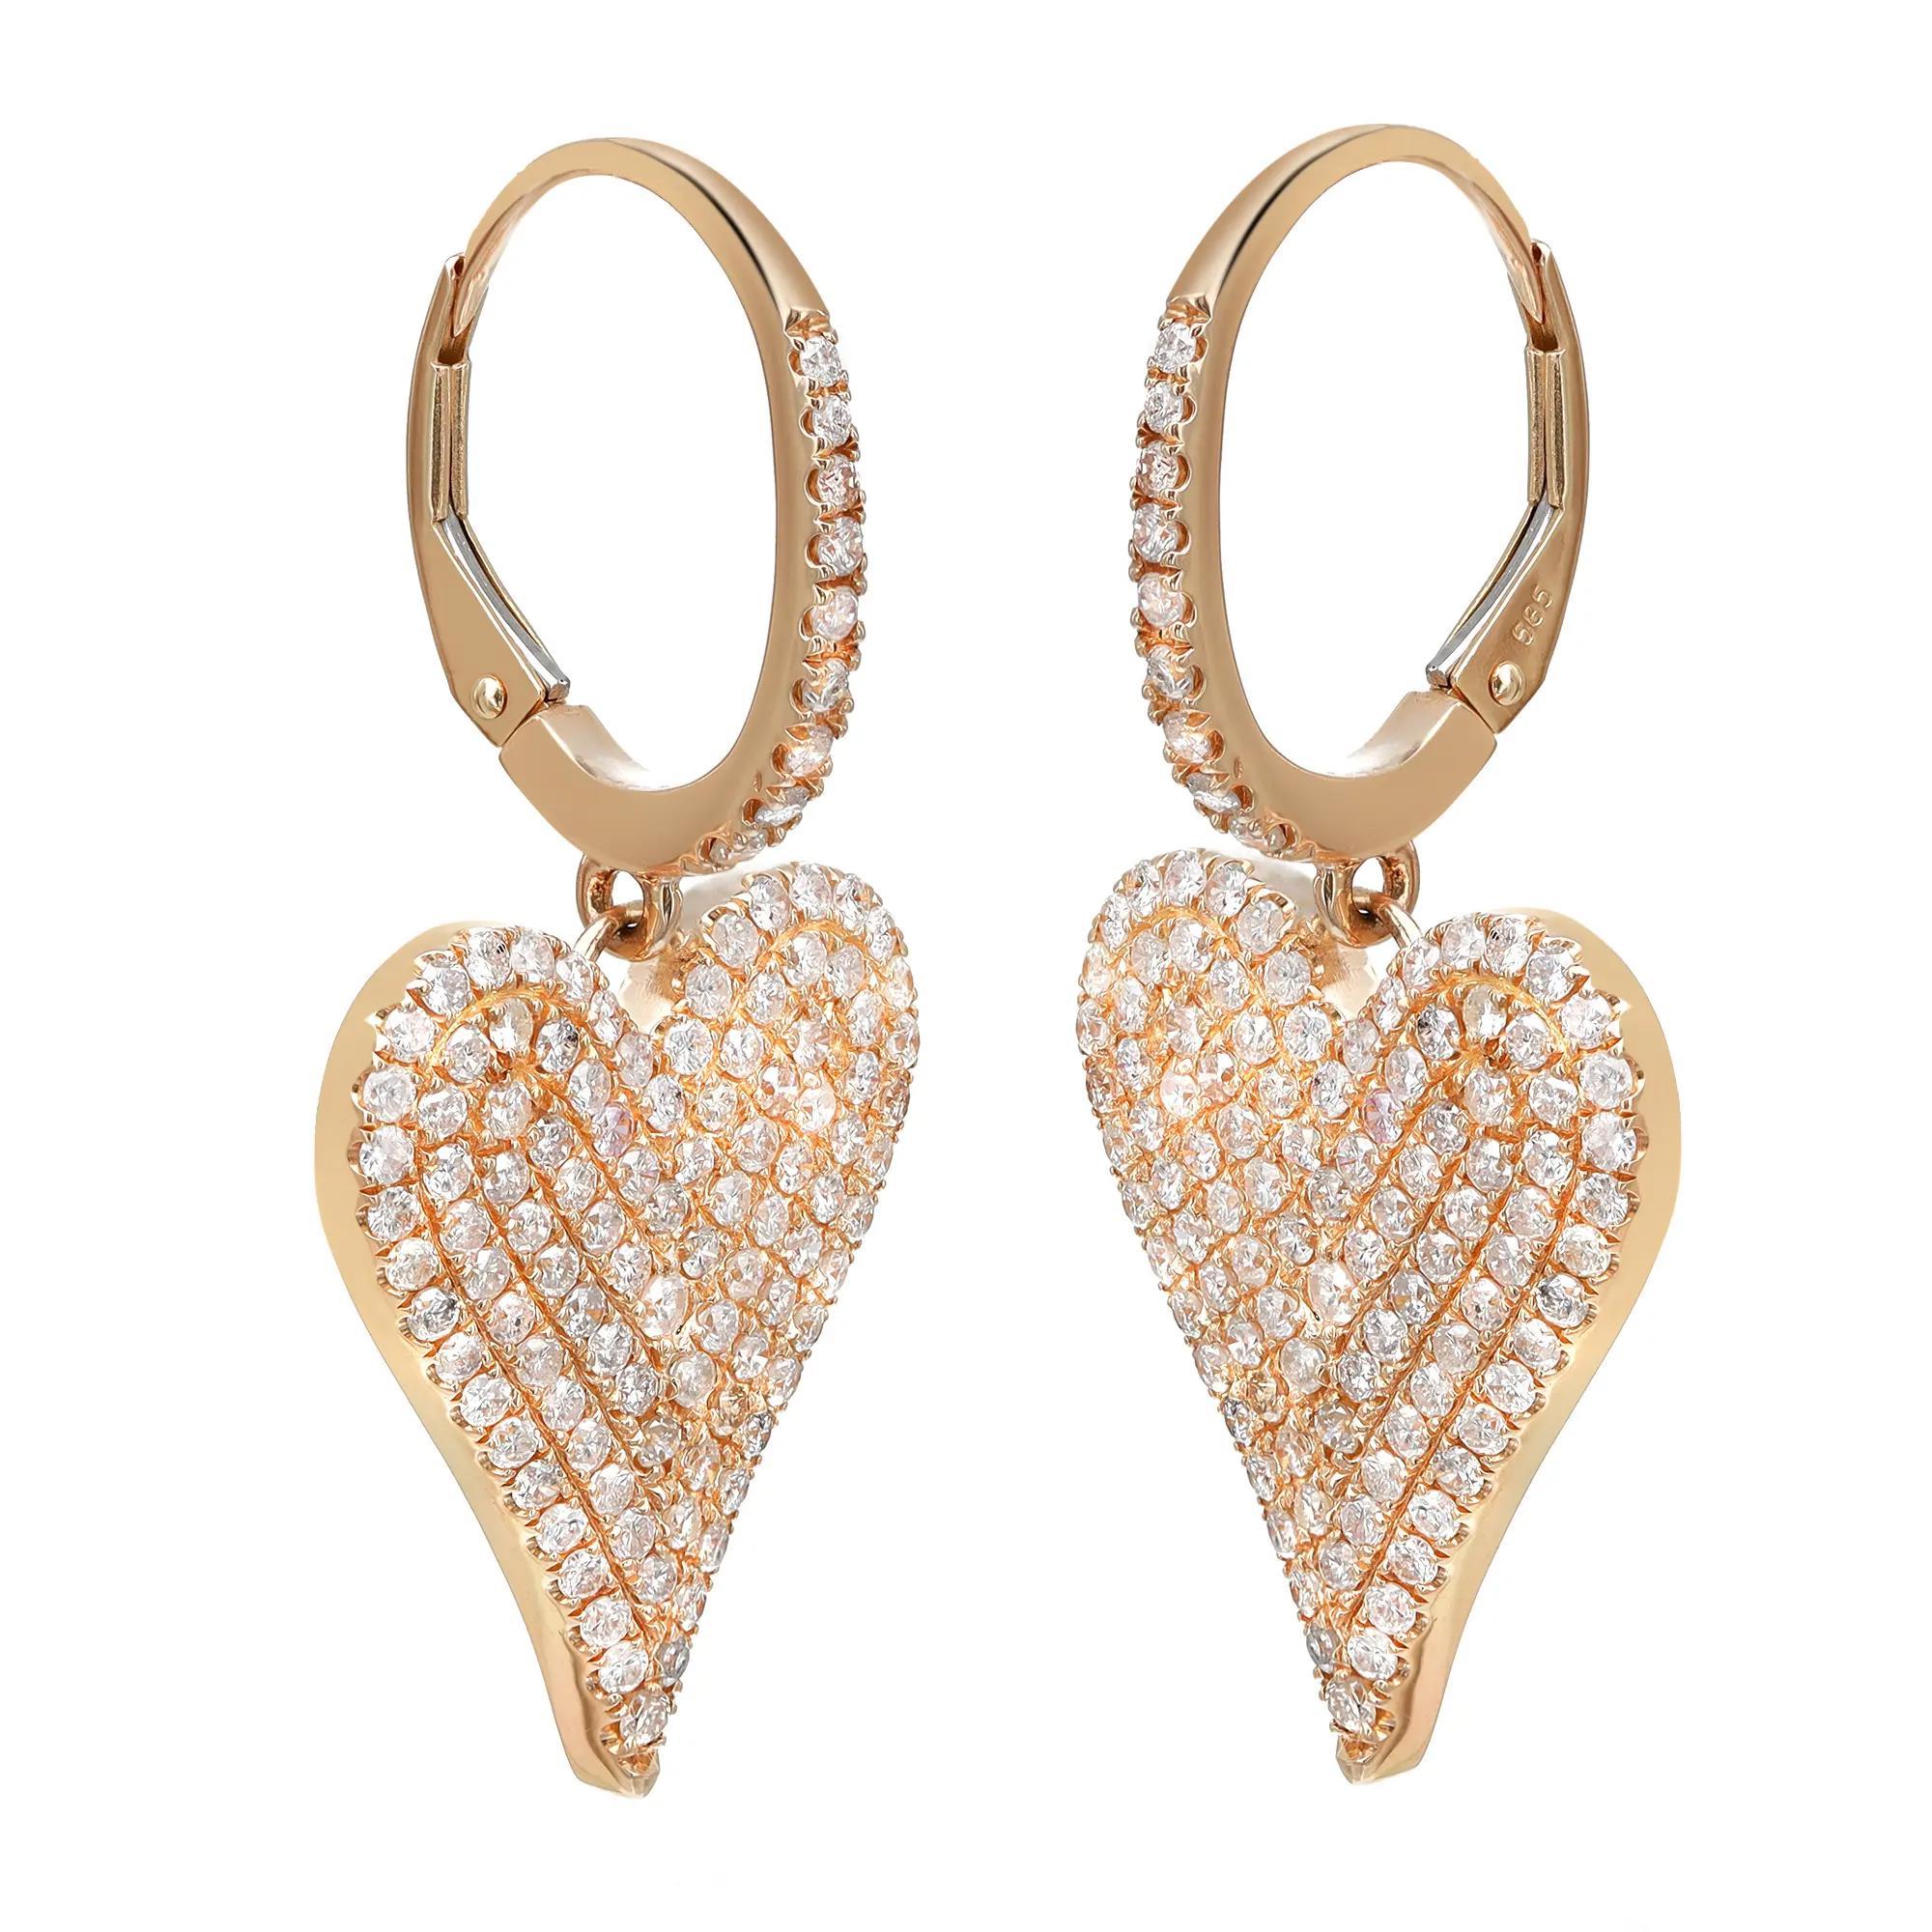 Modern Pave Round Cut Diamond Heart Drop Earrings 14K Yellow Gold 2.00Cttw For Sale